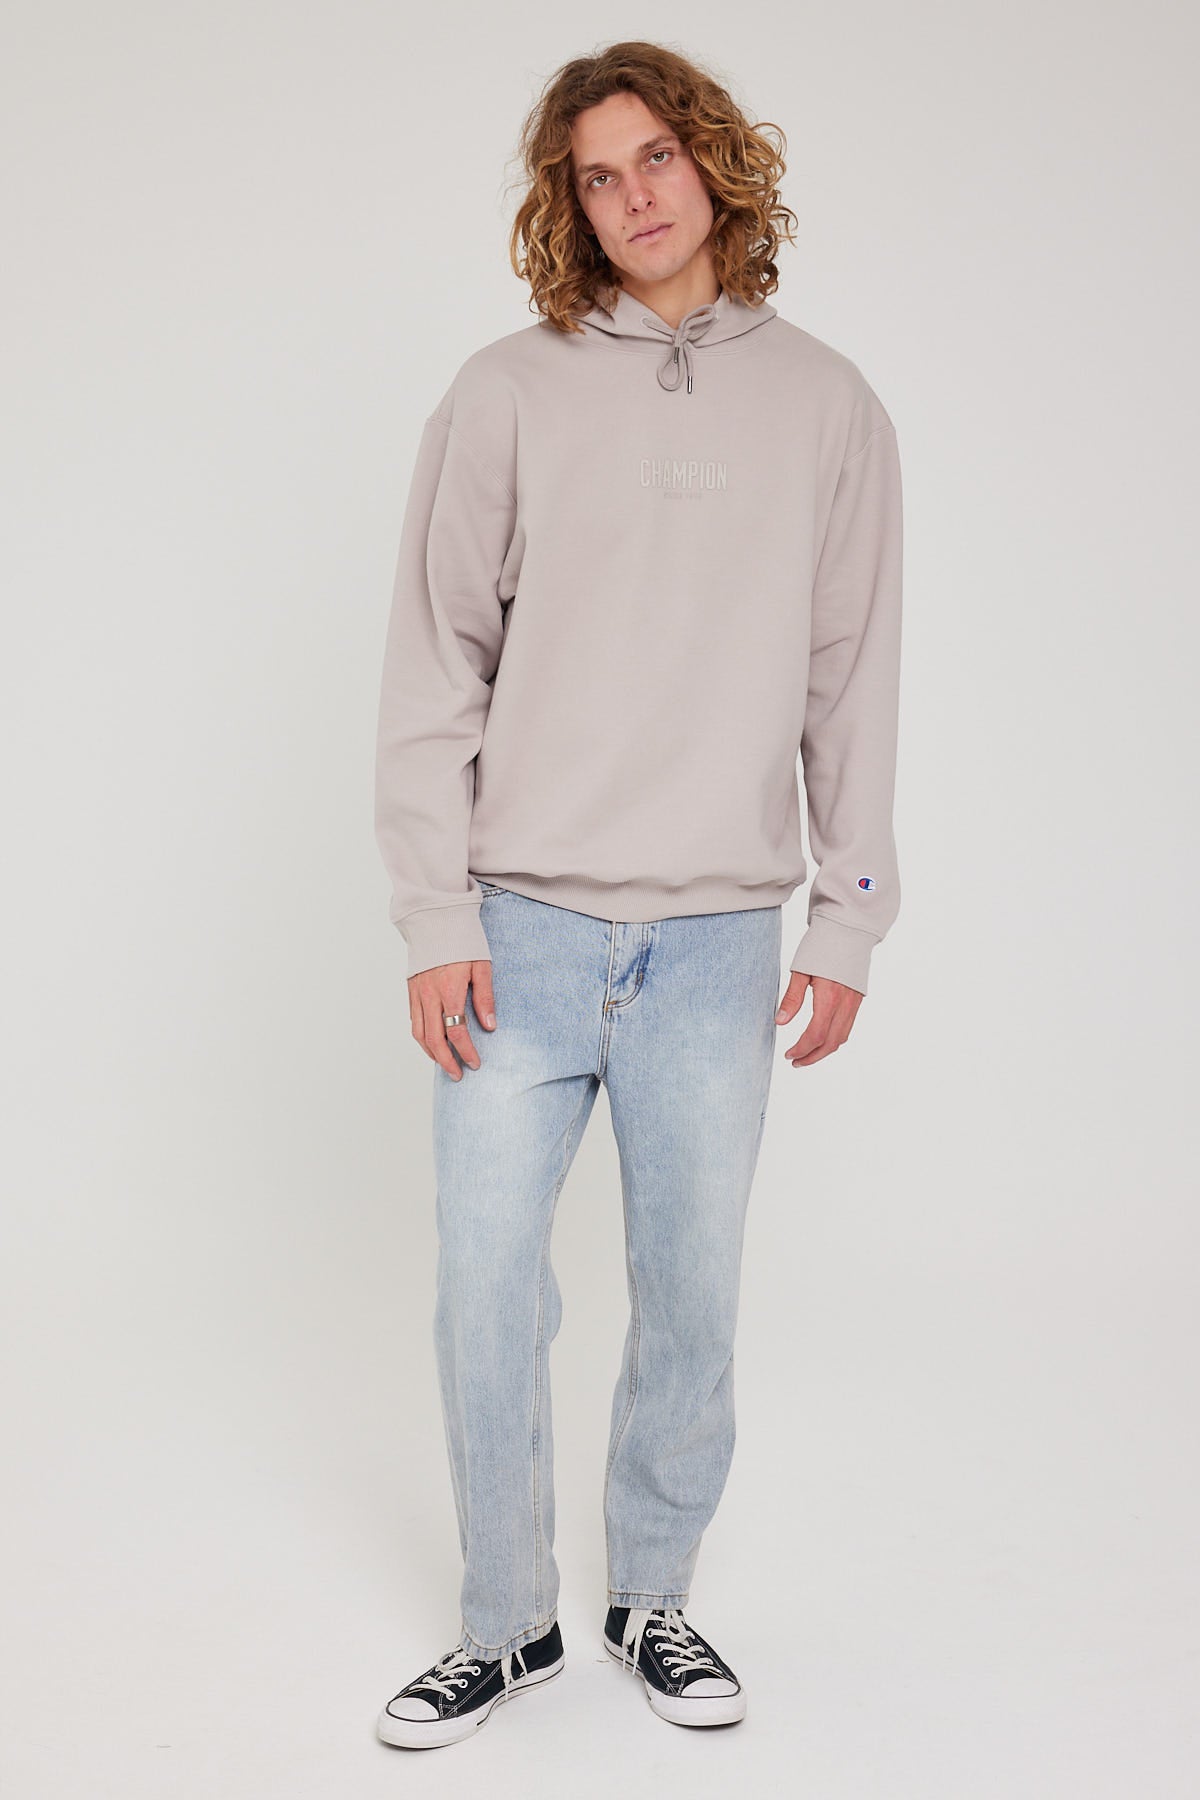 Champion Rochester Base Hoodie Pearl Oyster